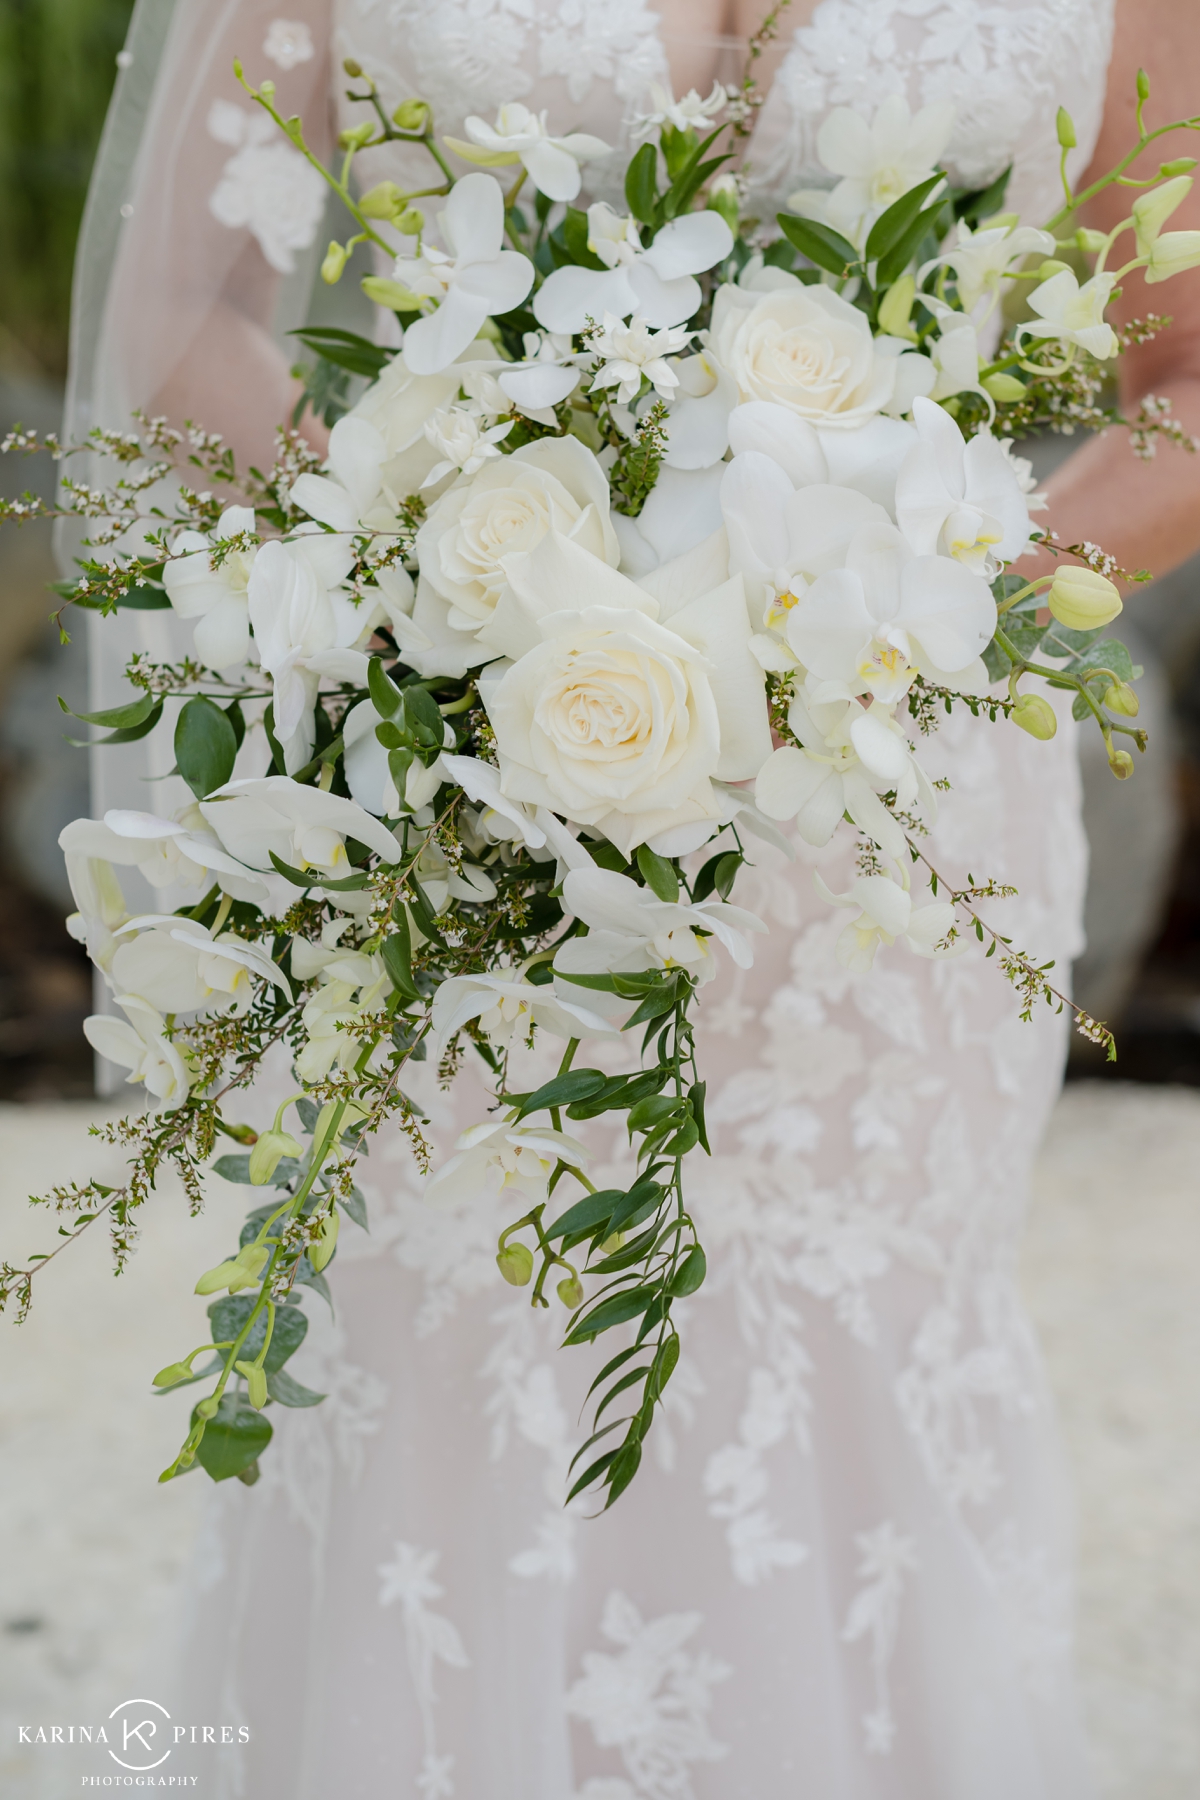 Bride holding a white bouquet filled with roses and orchids